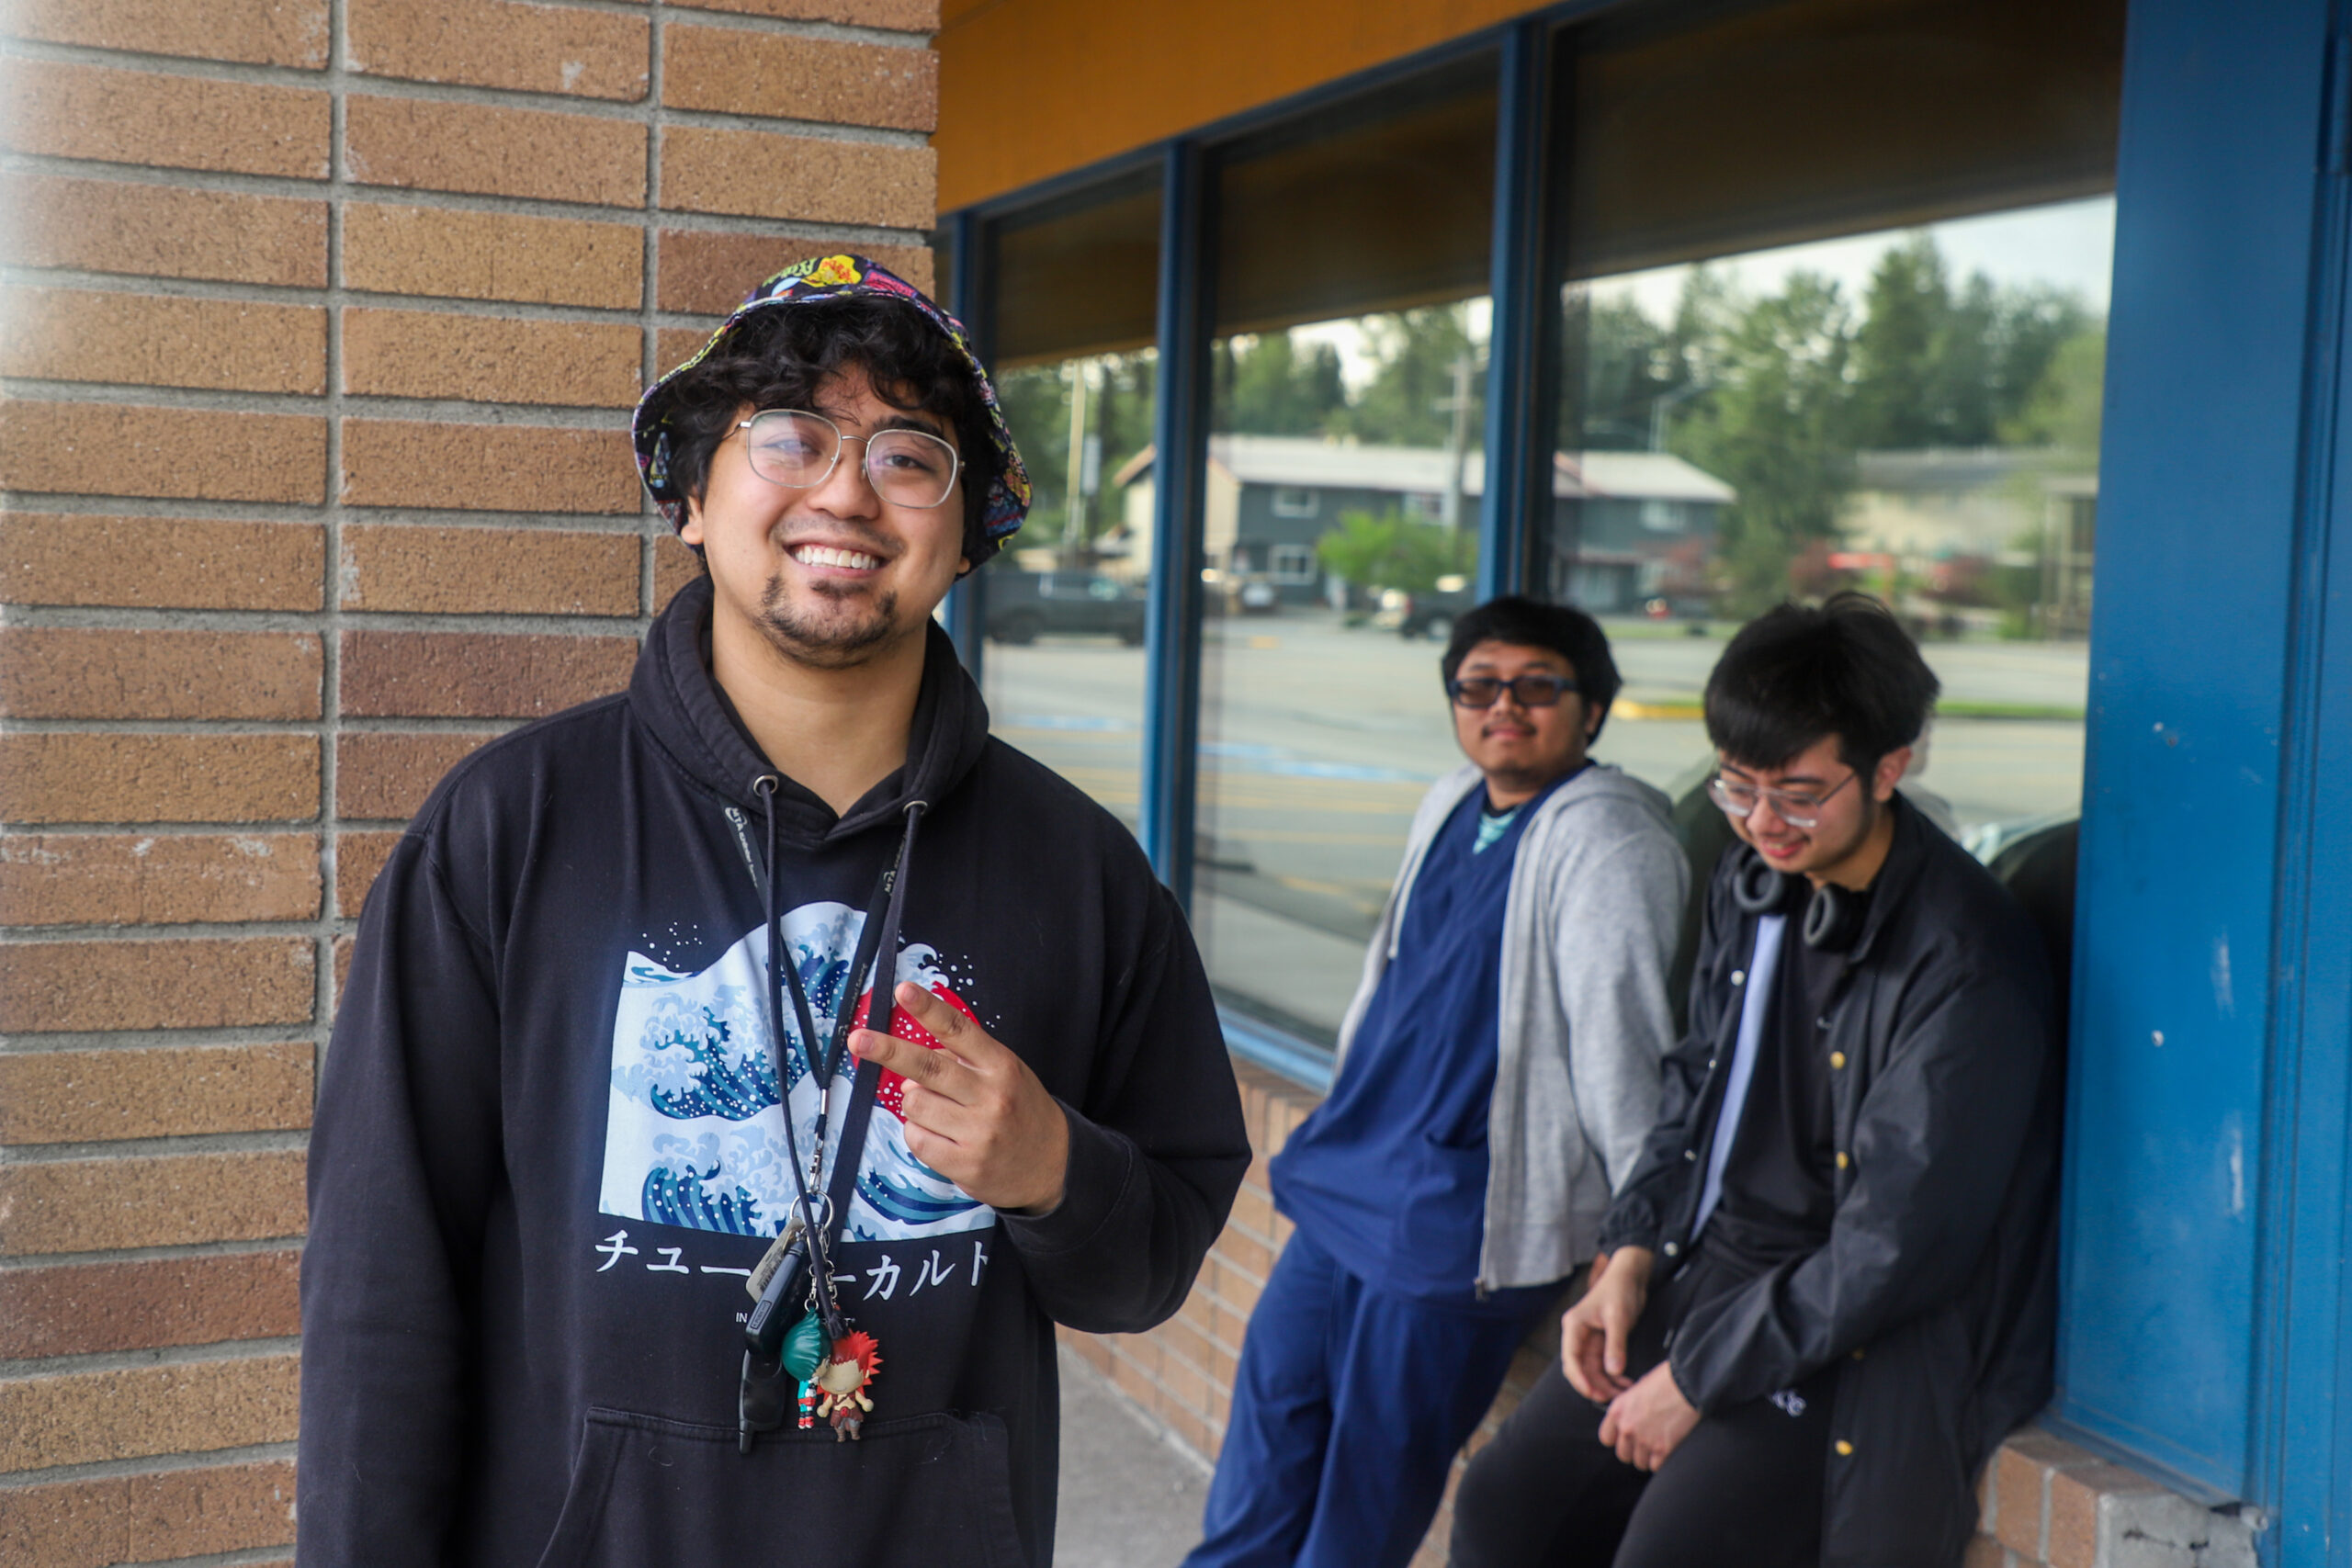 A man stands outside of a strip mall, wearing a colorful bucket hat and a lanyard with keychains on it. He throws a peace sign. Two people lean on the wall behind him.